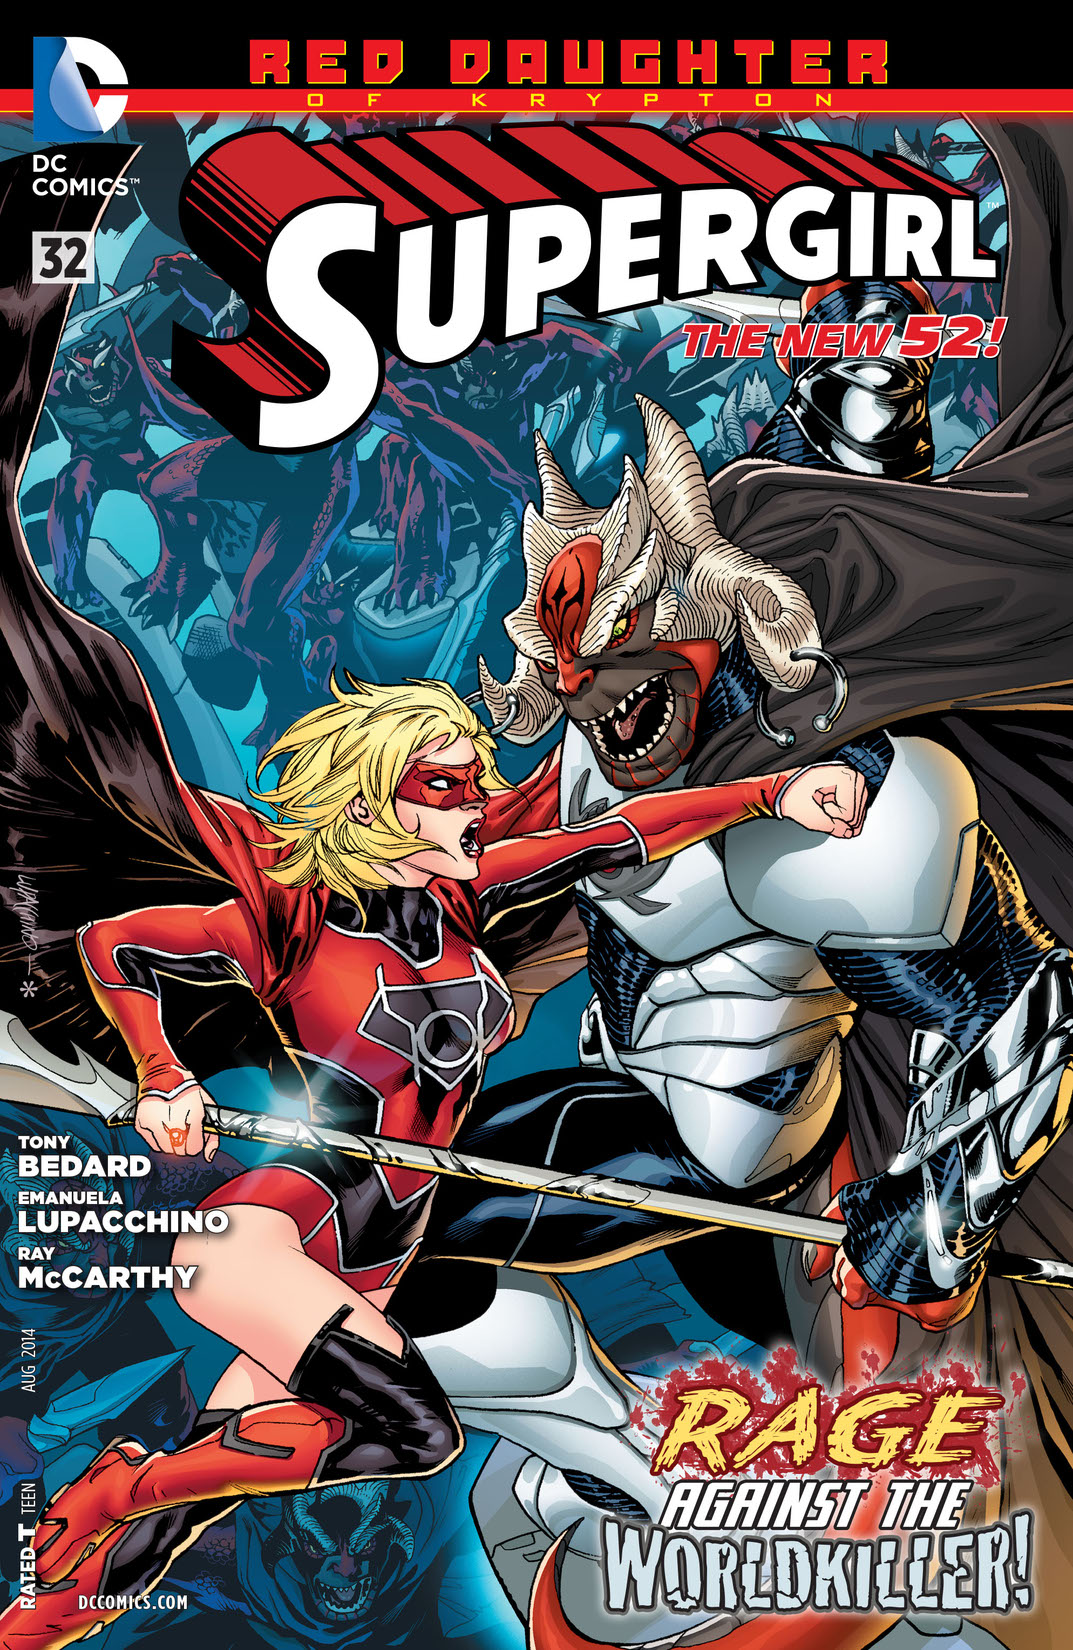 Supergirl (2011-) #32 preview images